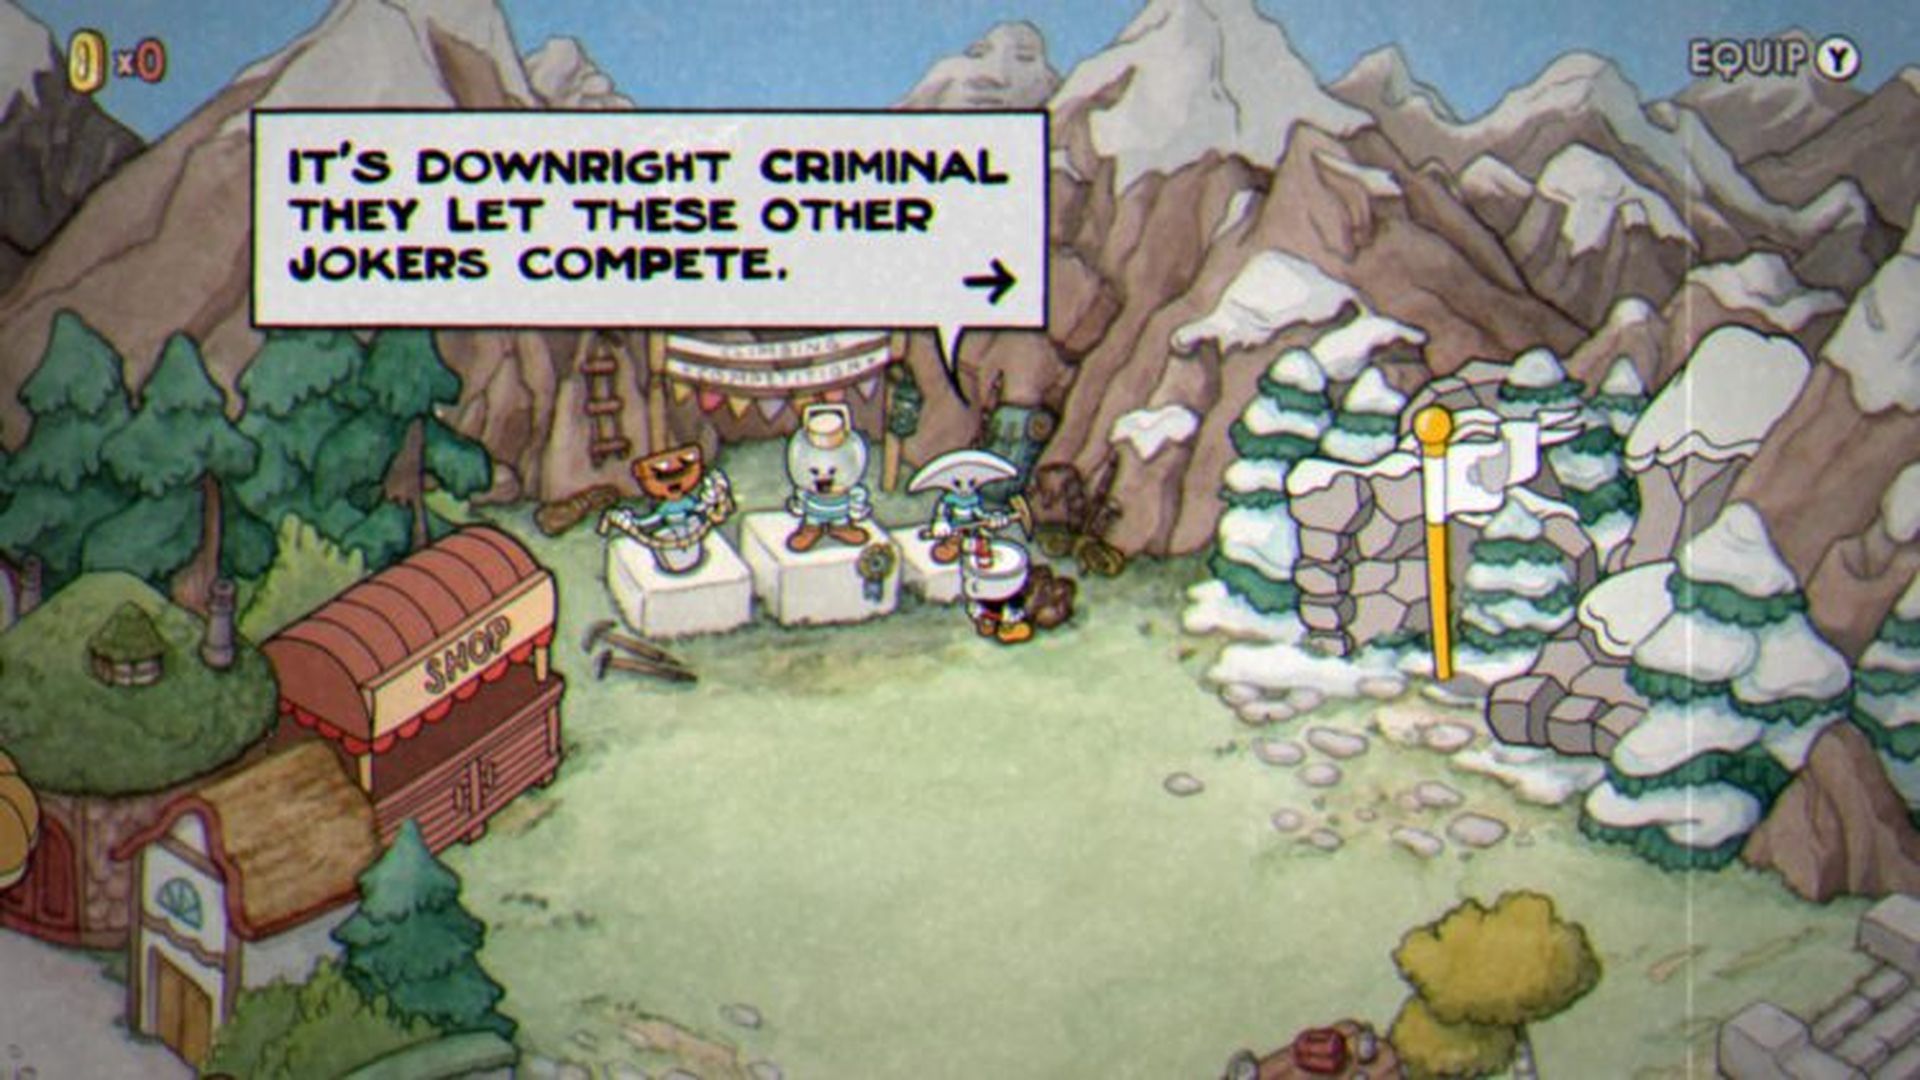 we are going to show you how to solve Cuphead DLC Graveyard puzzle, if you were unable to defeat Cuphead DLC secret boss we got some important tips for you.